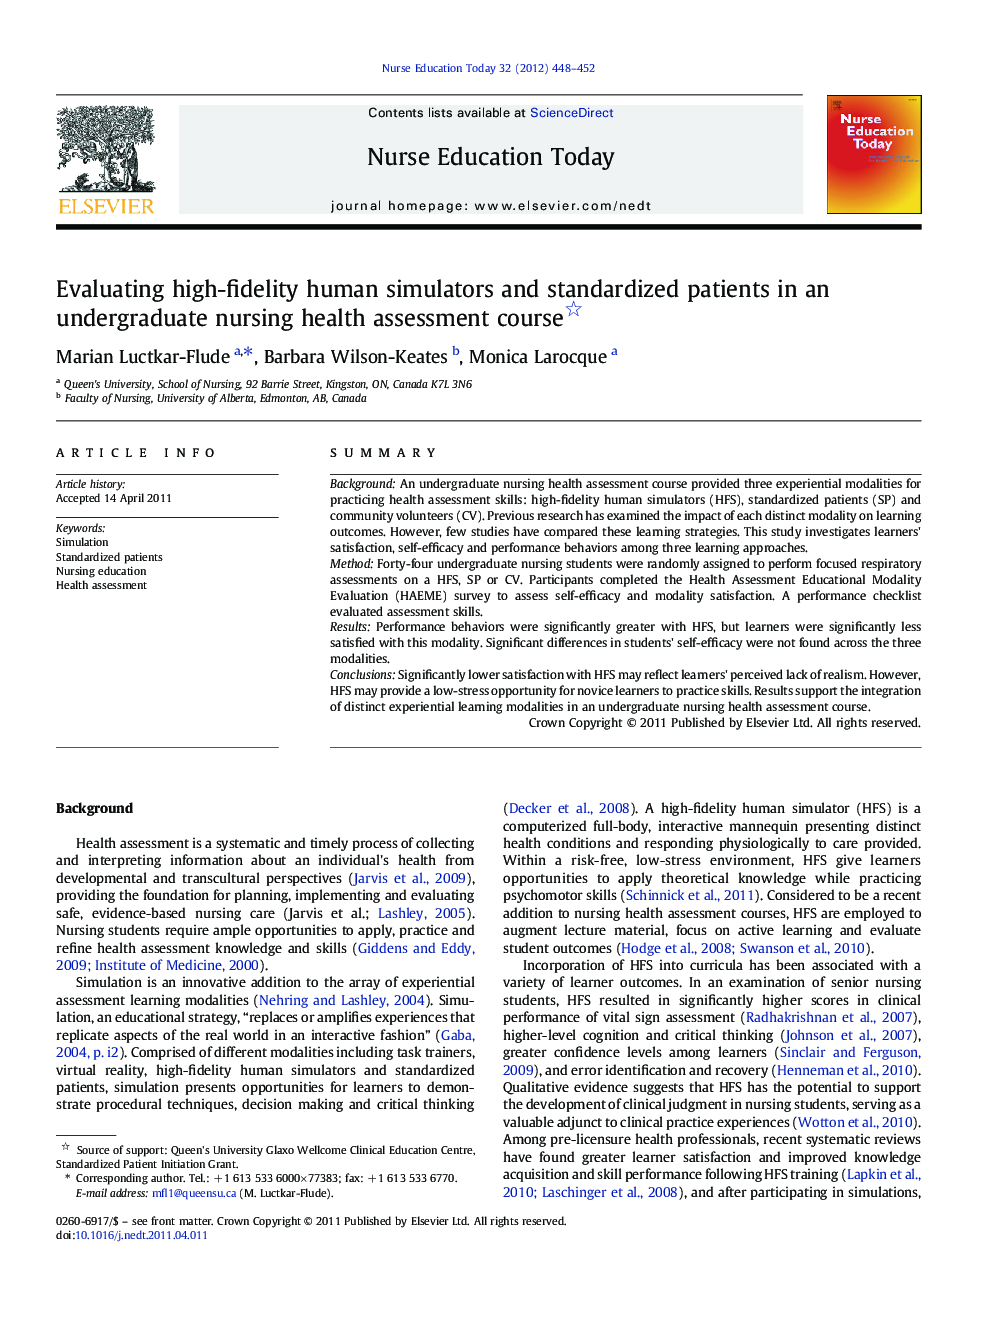 Evaluating high-fidelity human simulators and standardized patients in an undergraduate nursing health assessment course 